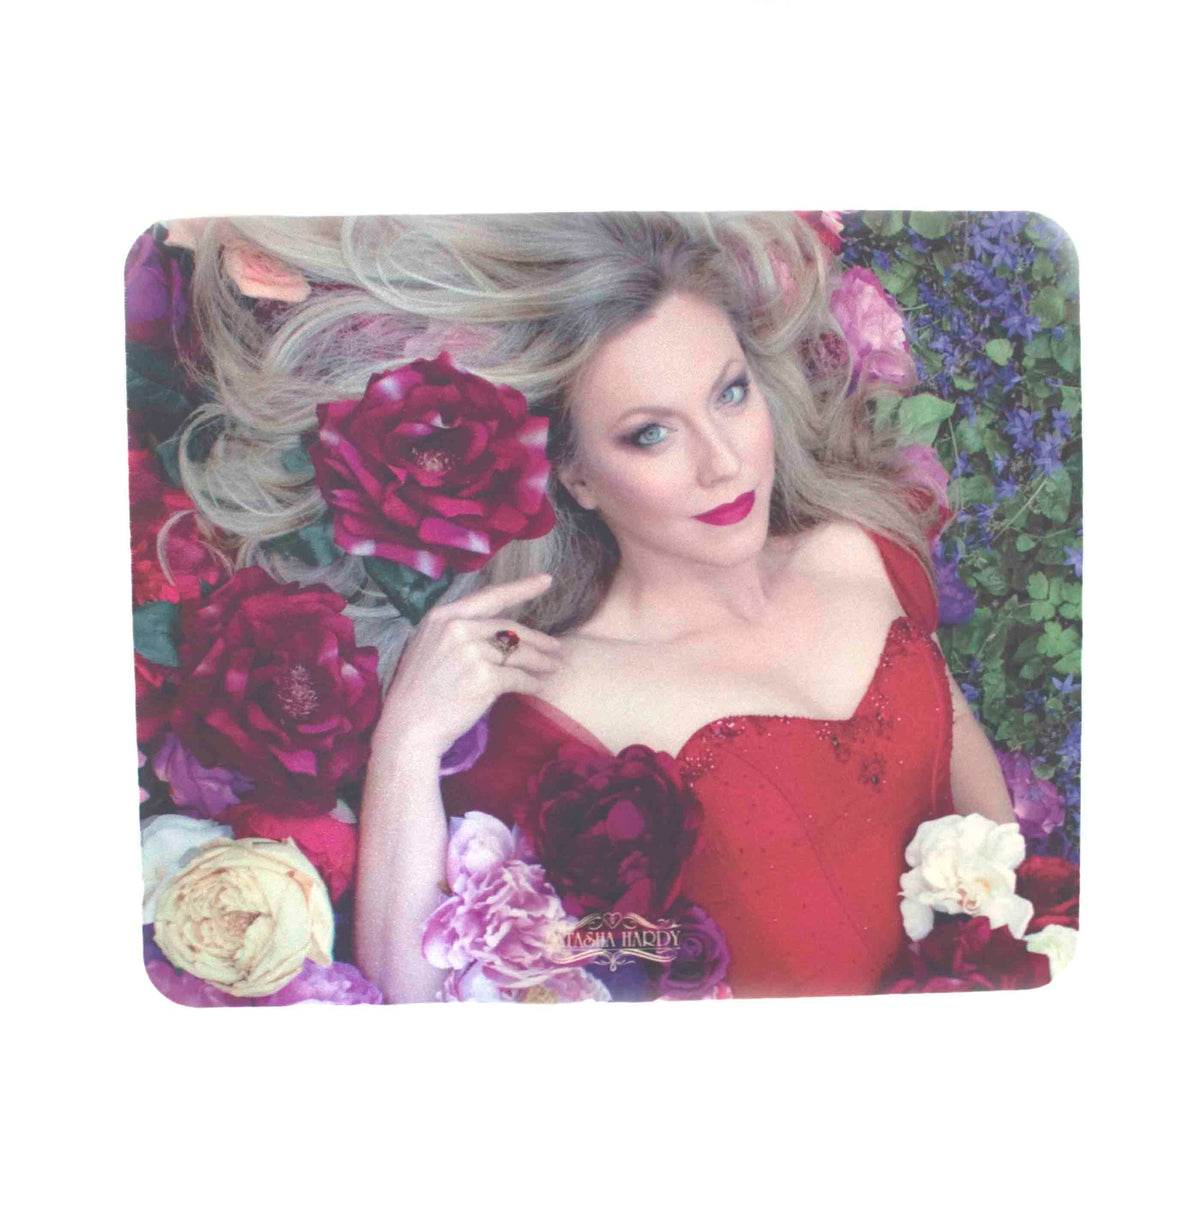 Lost in Love 'Key to my Heart' Mousemat